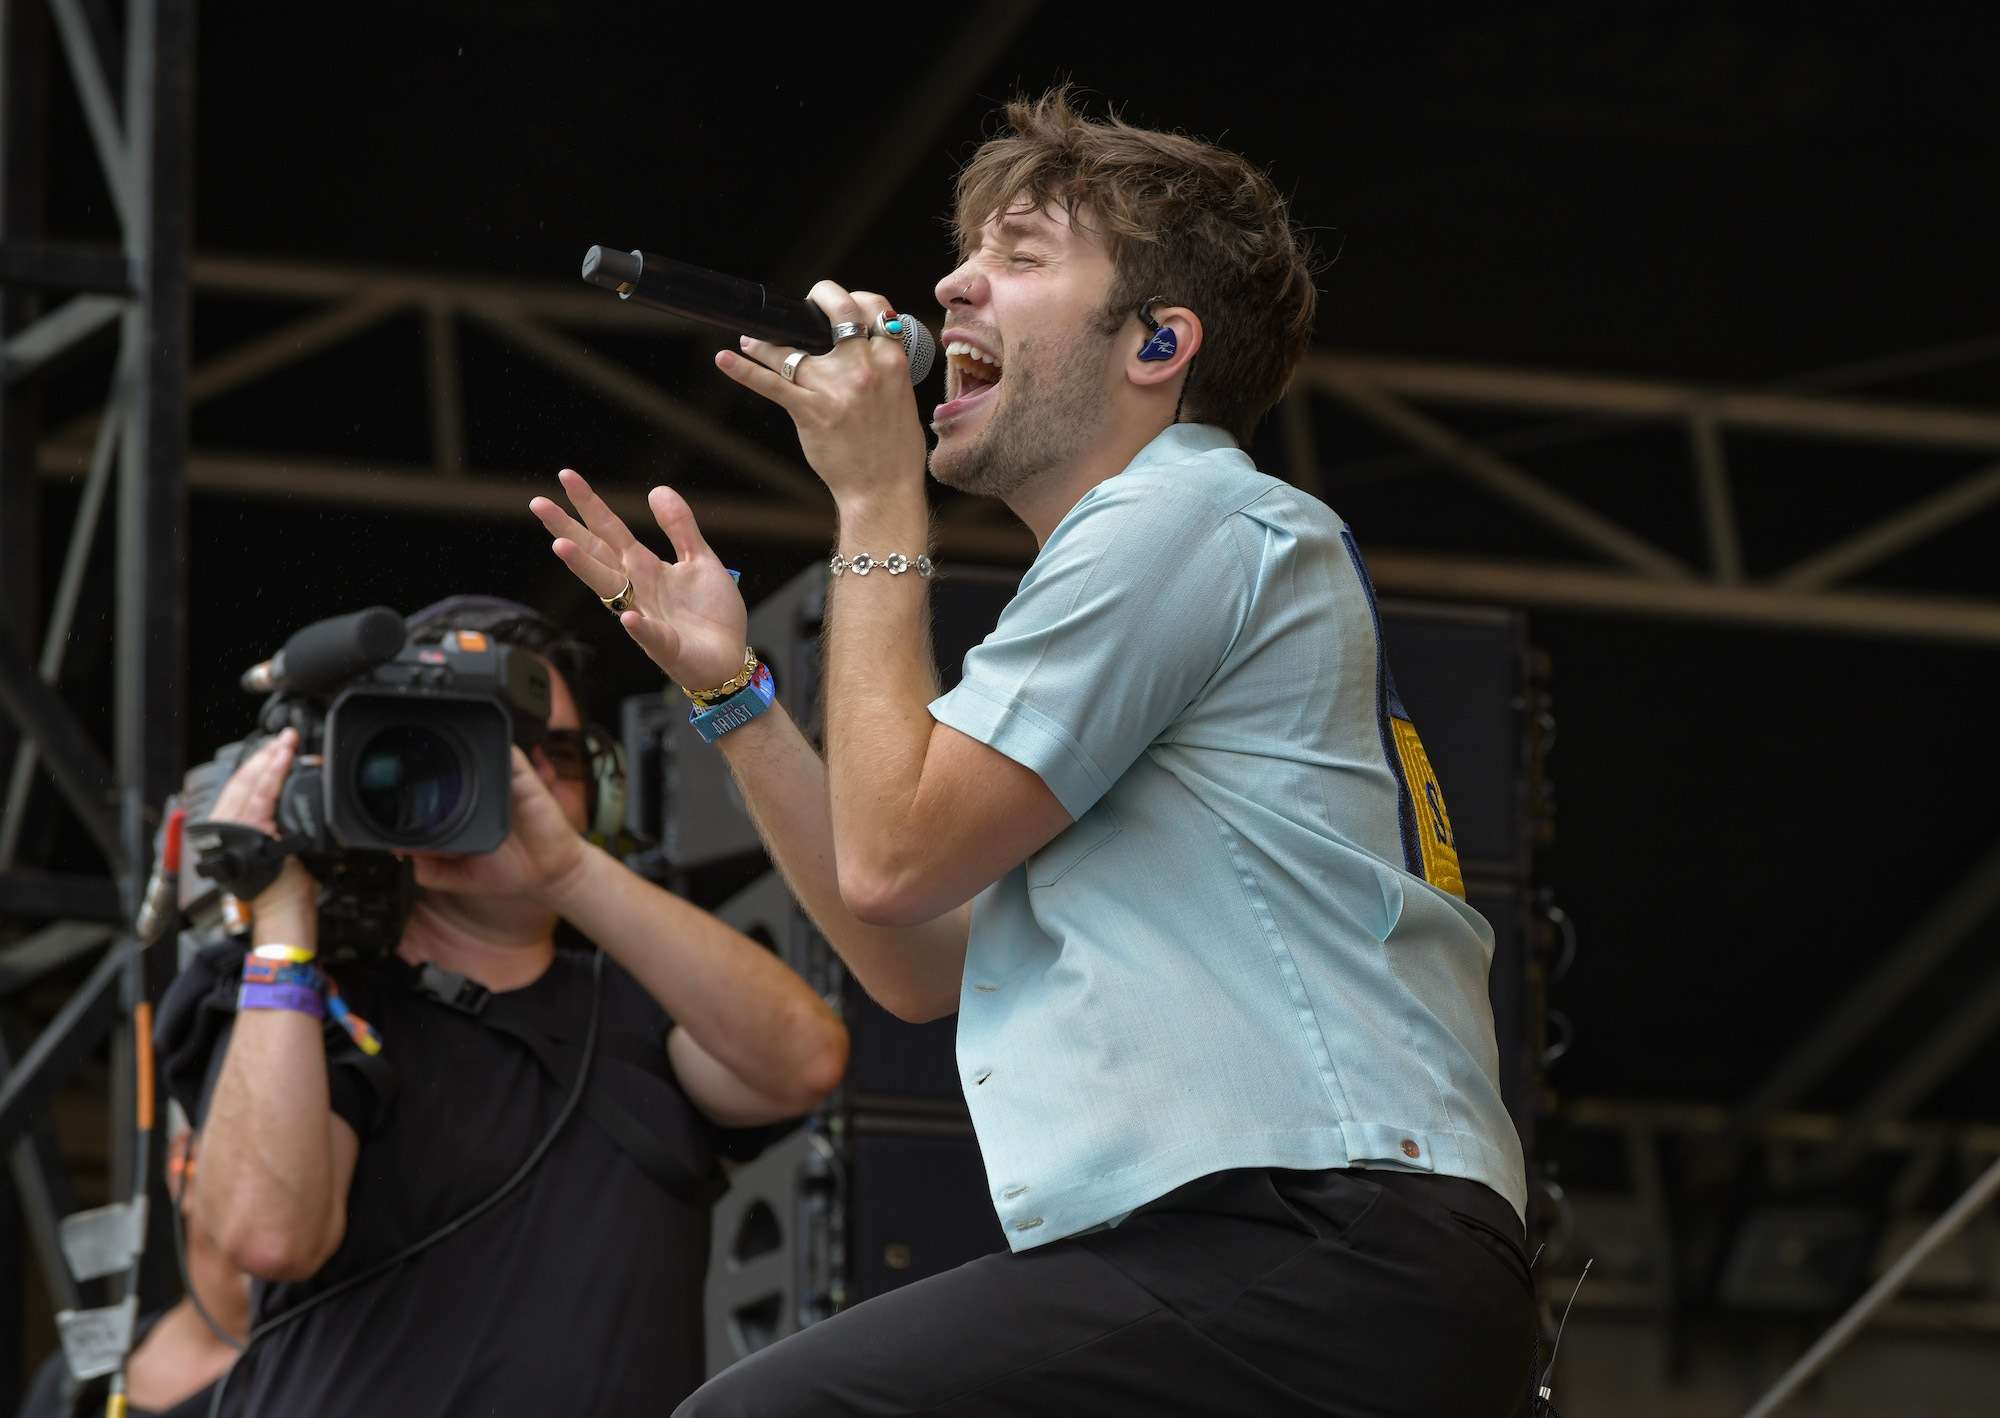 Christian French Live at Lollapalooza [GALLERY] 7